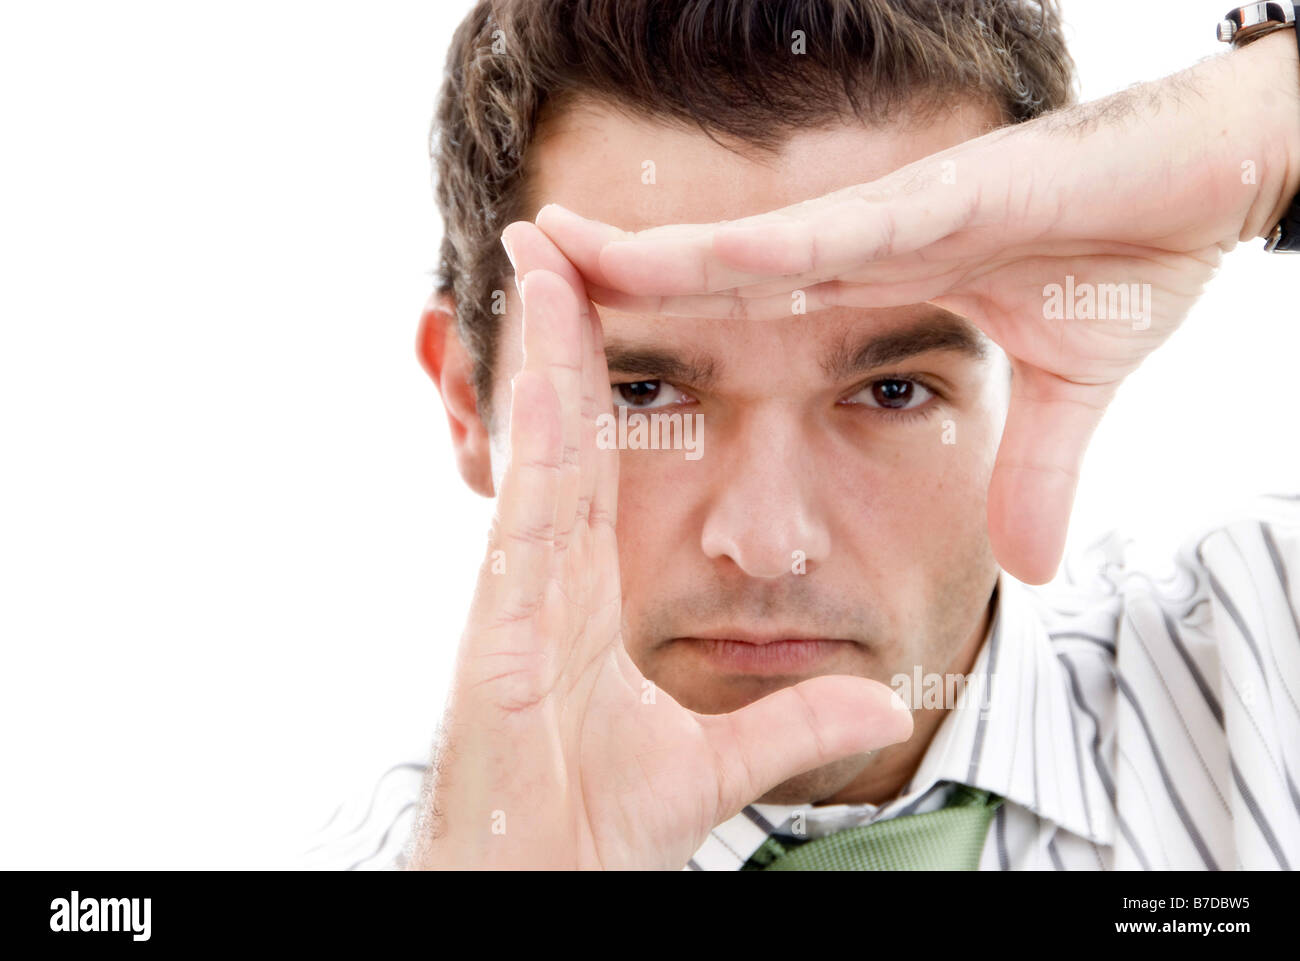 young man gestures Stock Photo